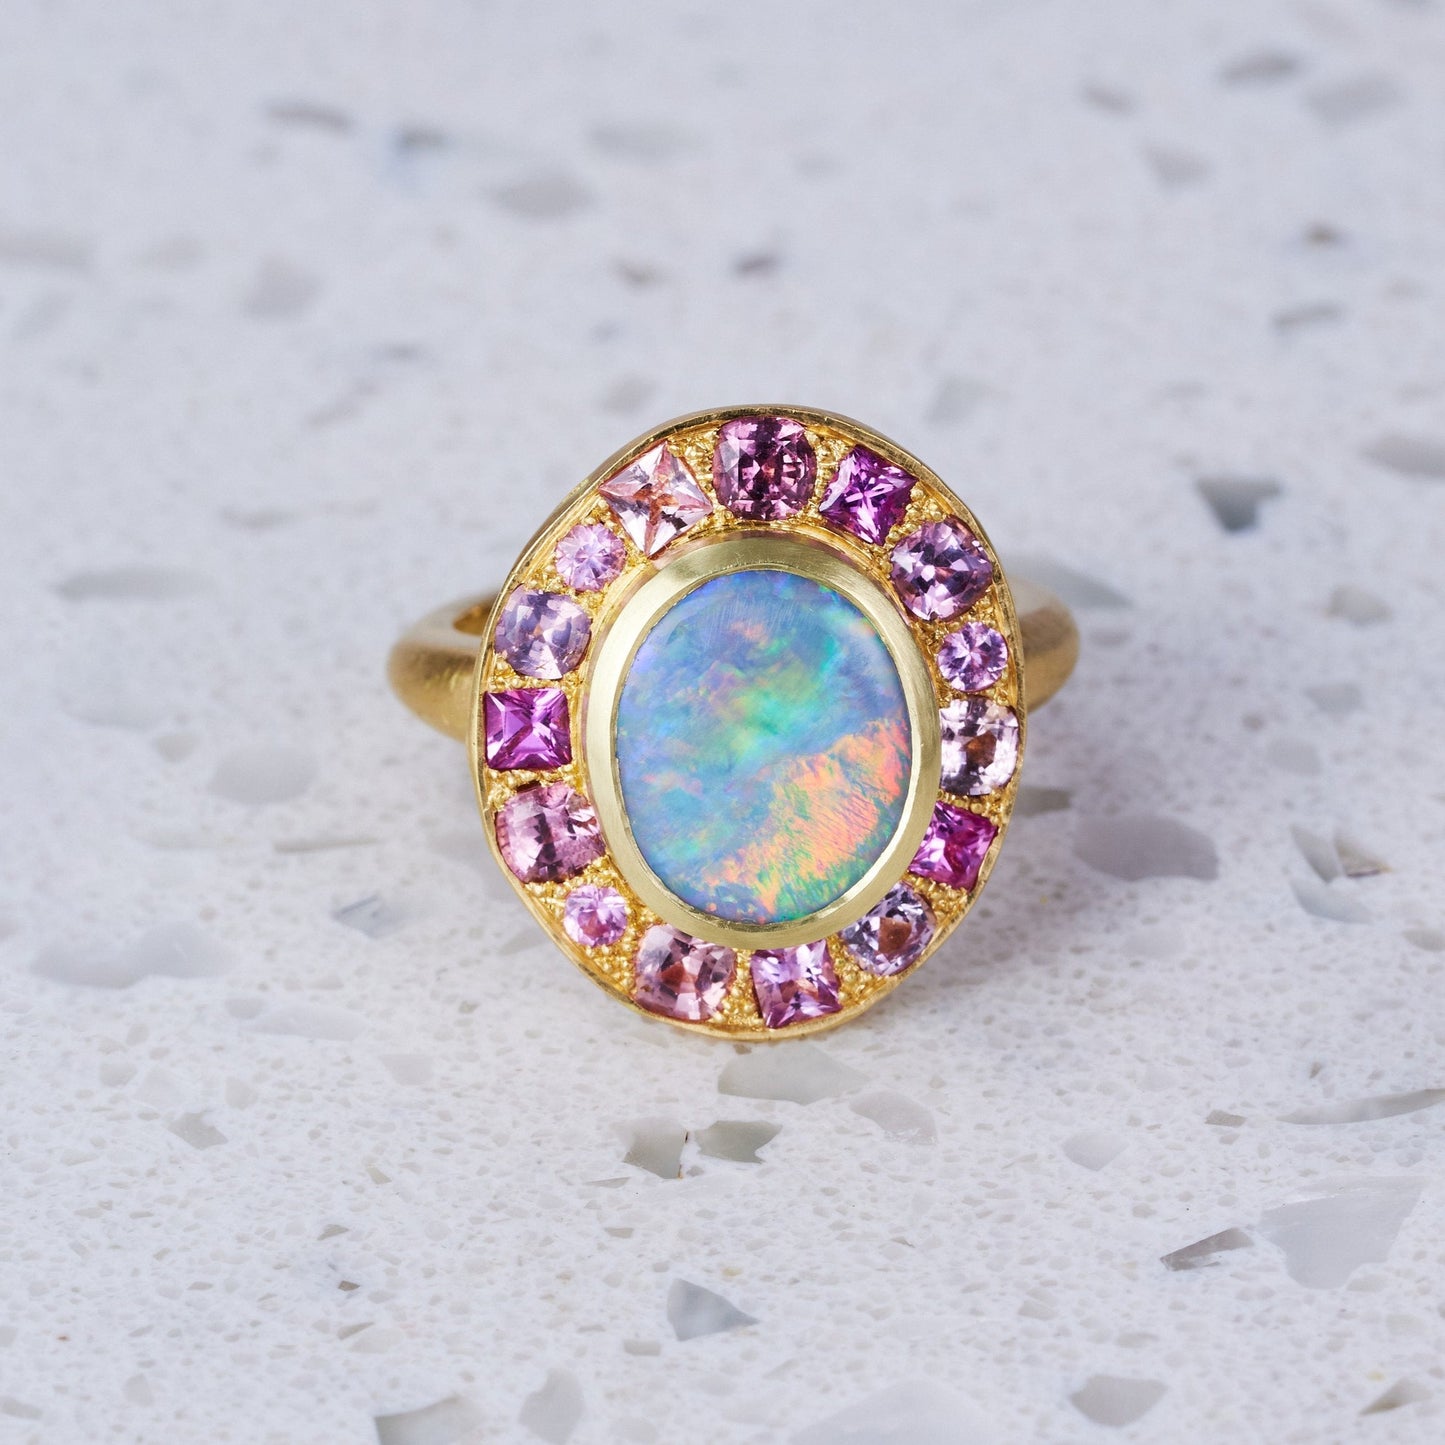 One-off Black Opal and Shades of Pink Sapphires Pebble Ring in 18ct Yellow Gold, Size P (In Stock)